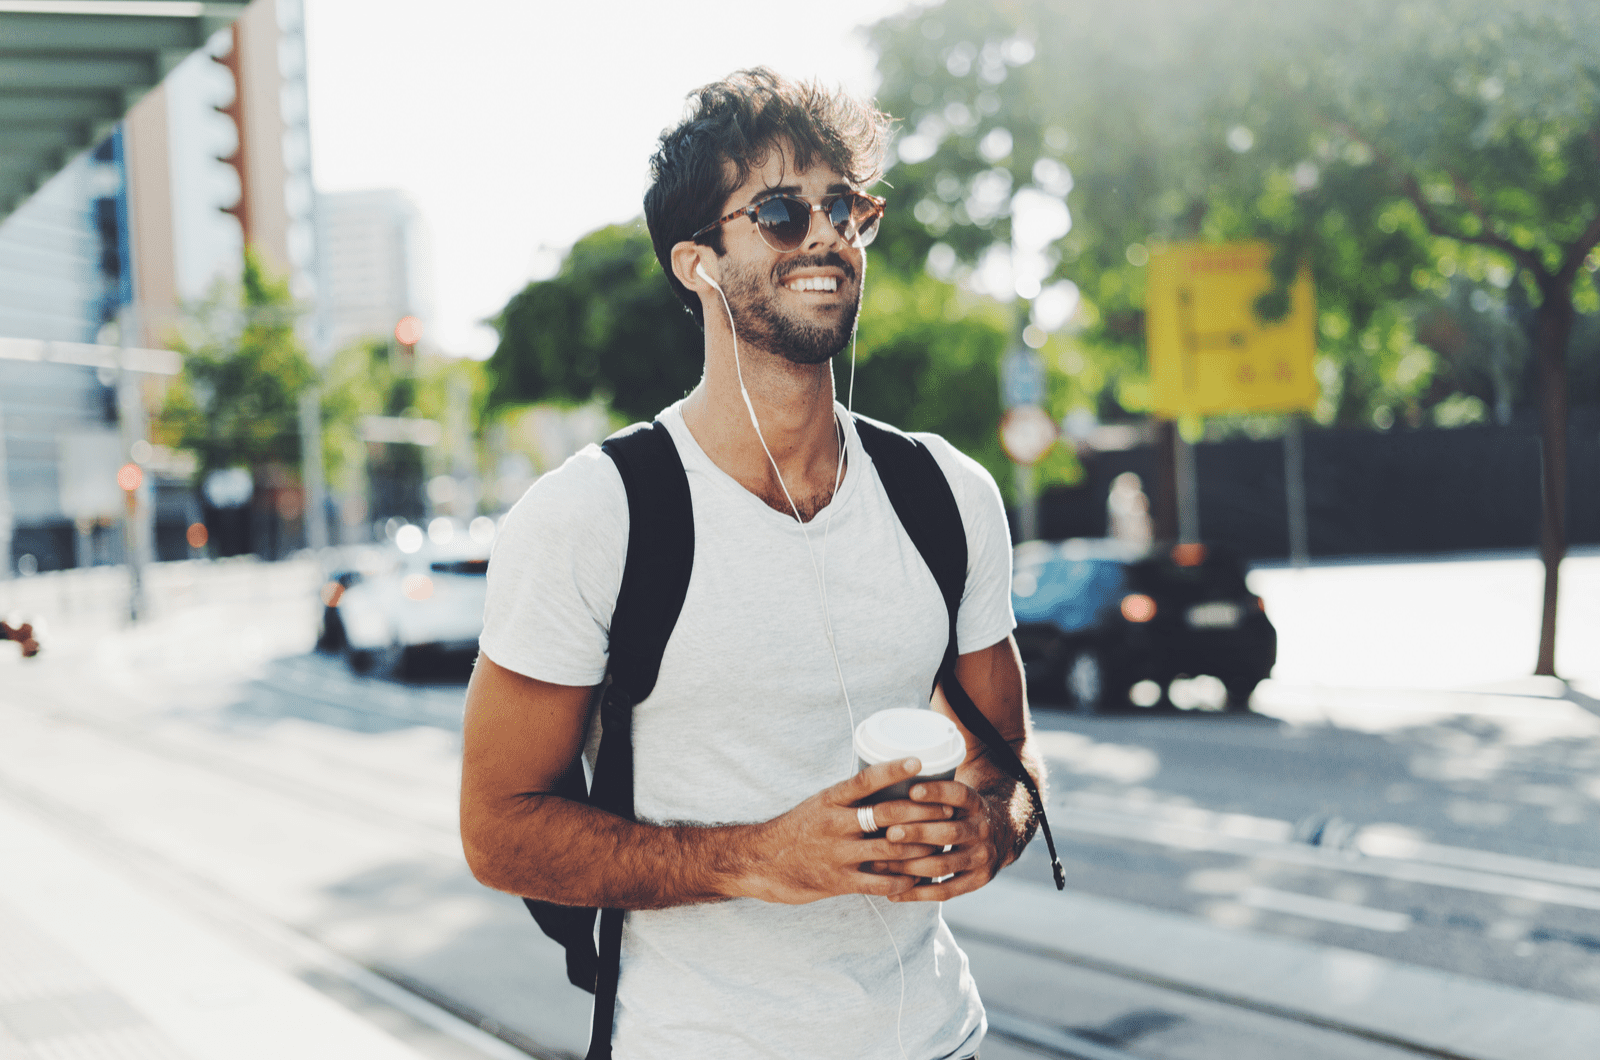 a smiling man with frizzy hair walks down the street